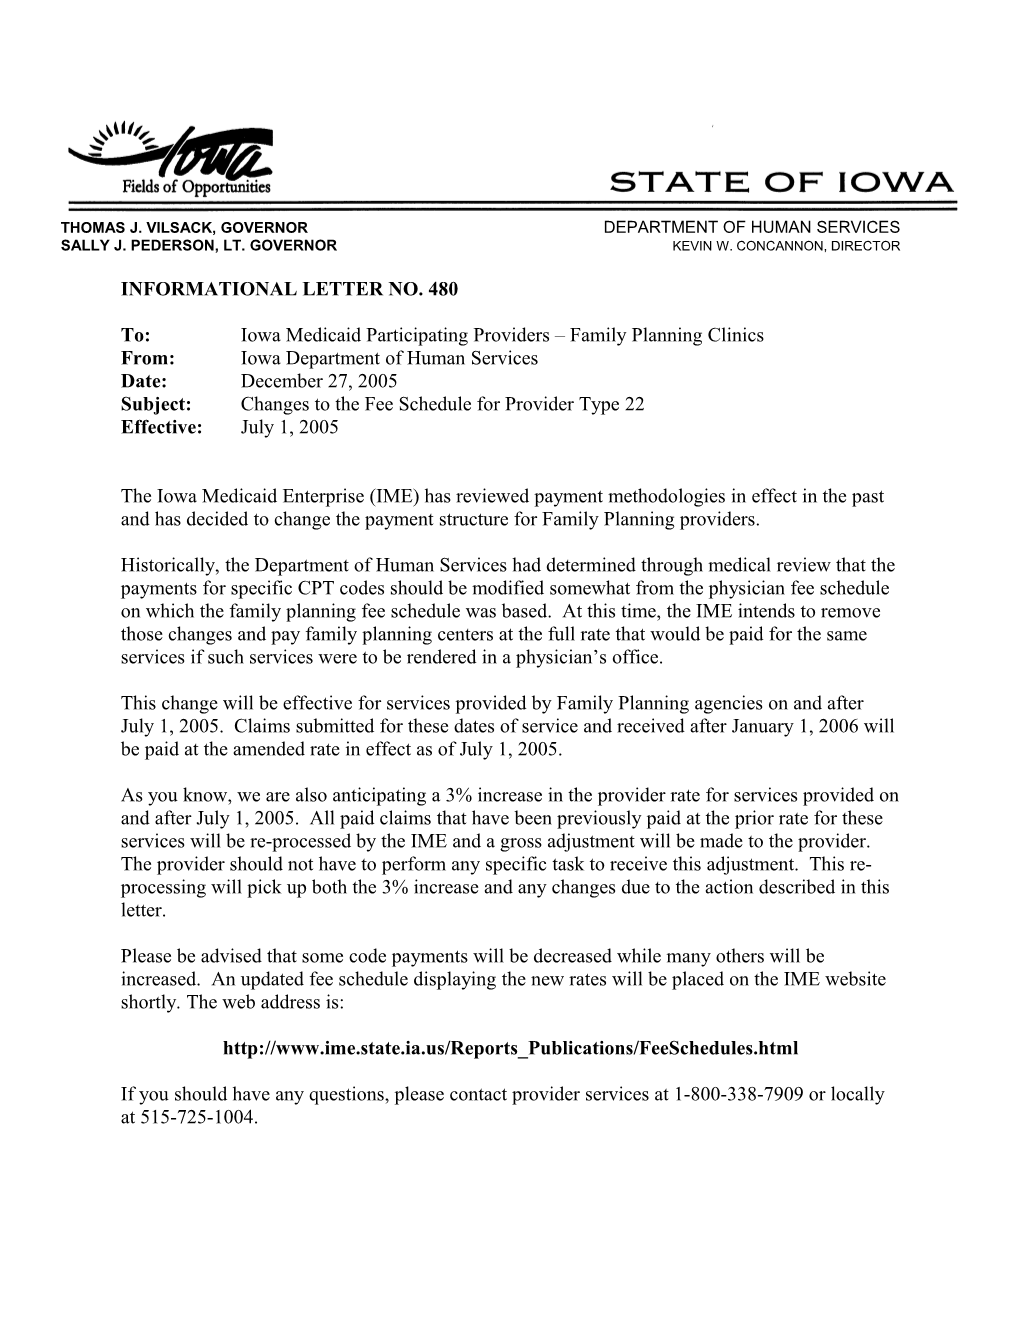 Department of Human Services Letterhead s8